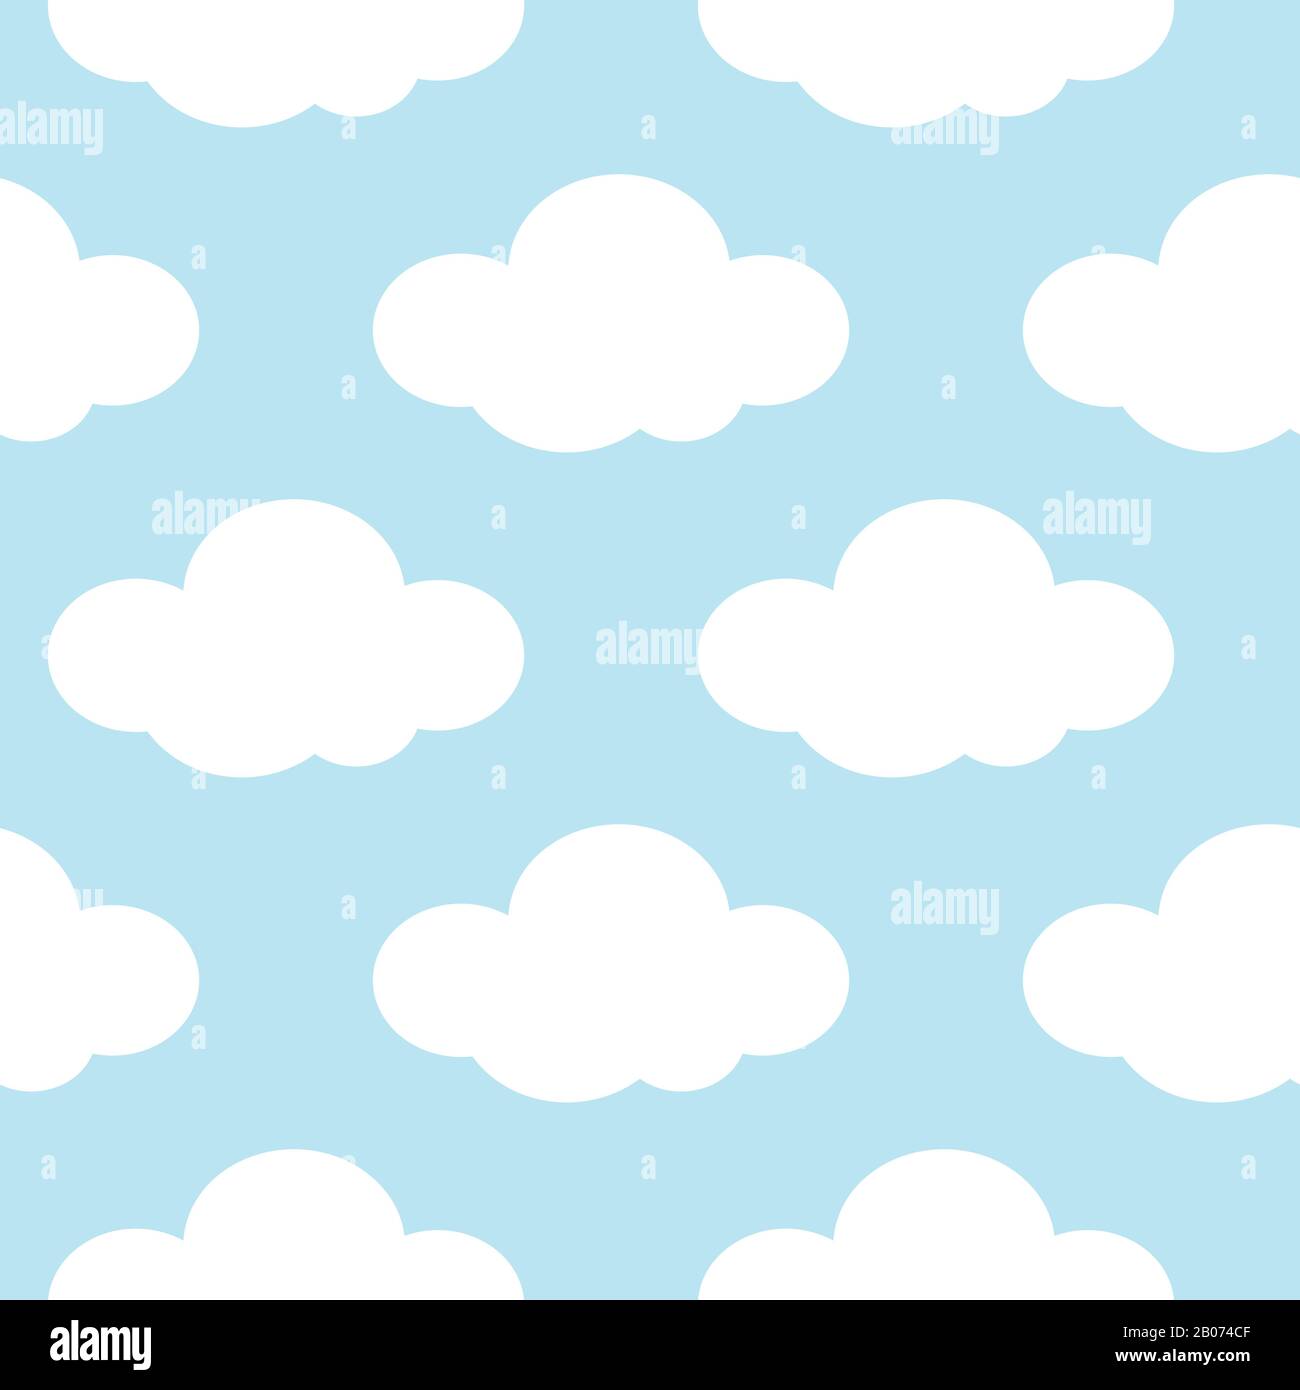 Light blue sky with white clouds seamless background. Vector illustration Stock Vector